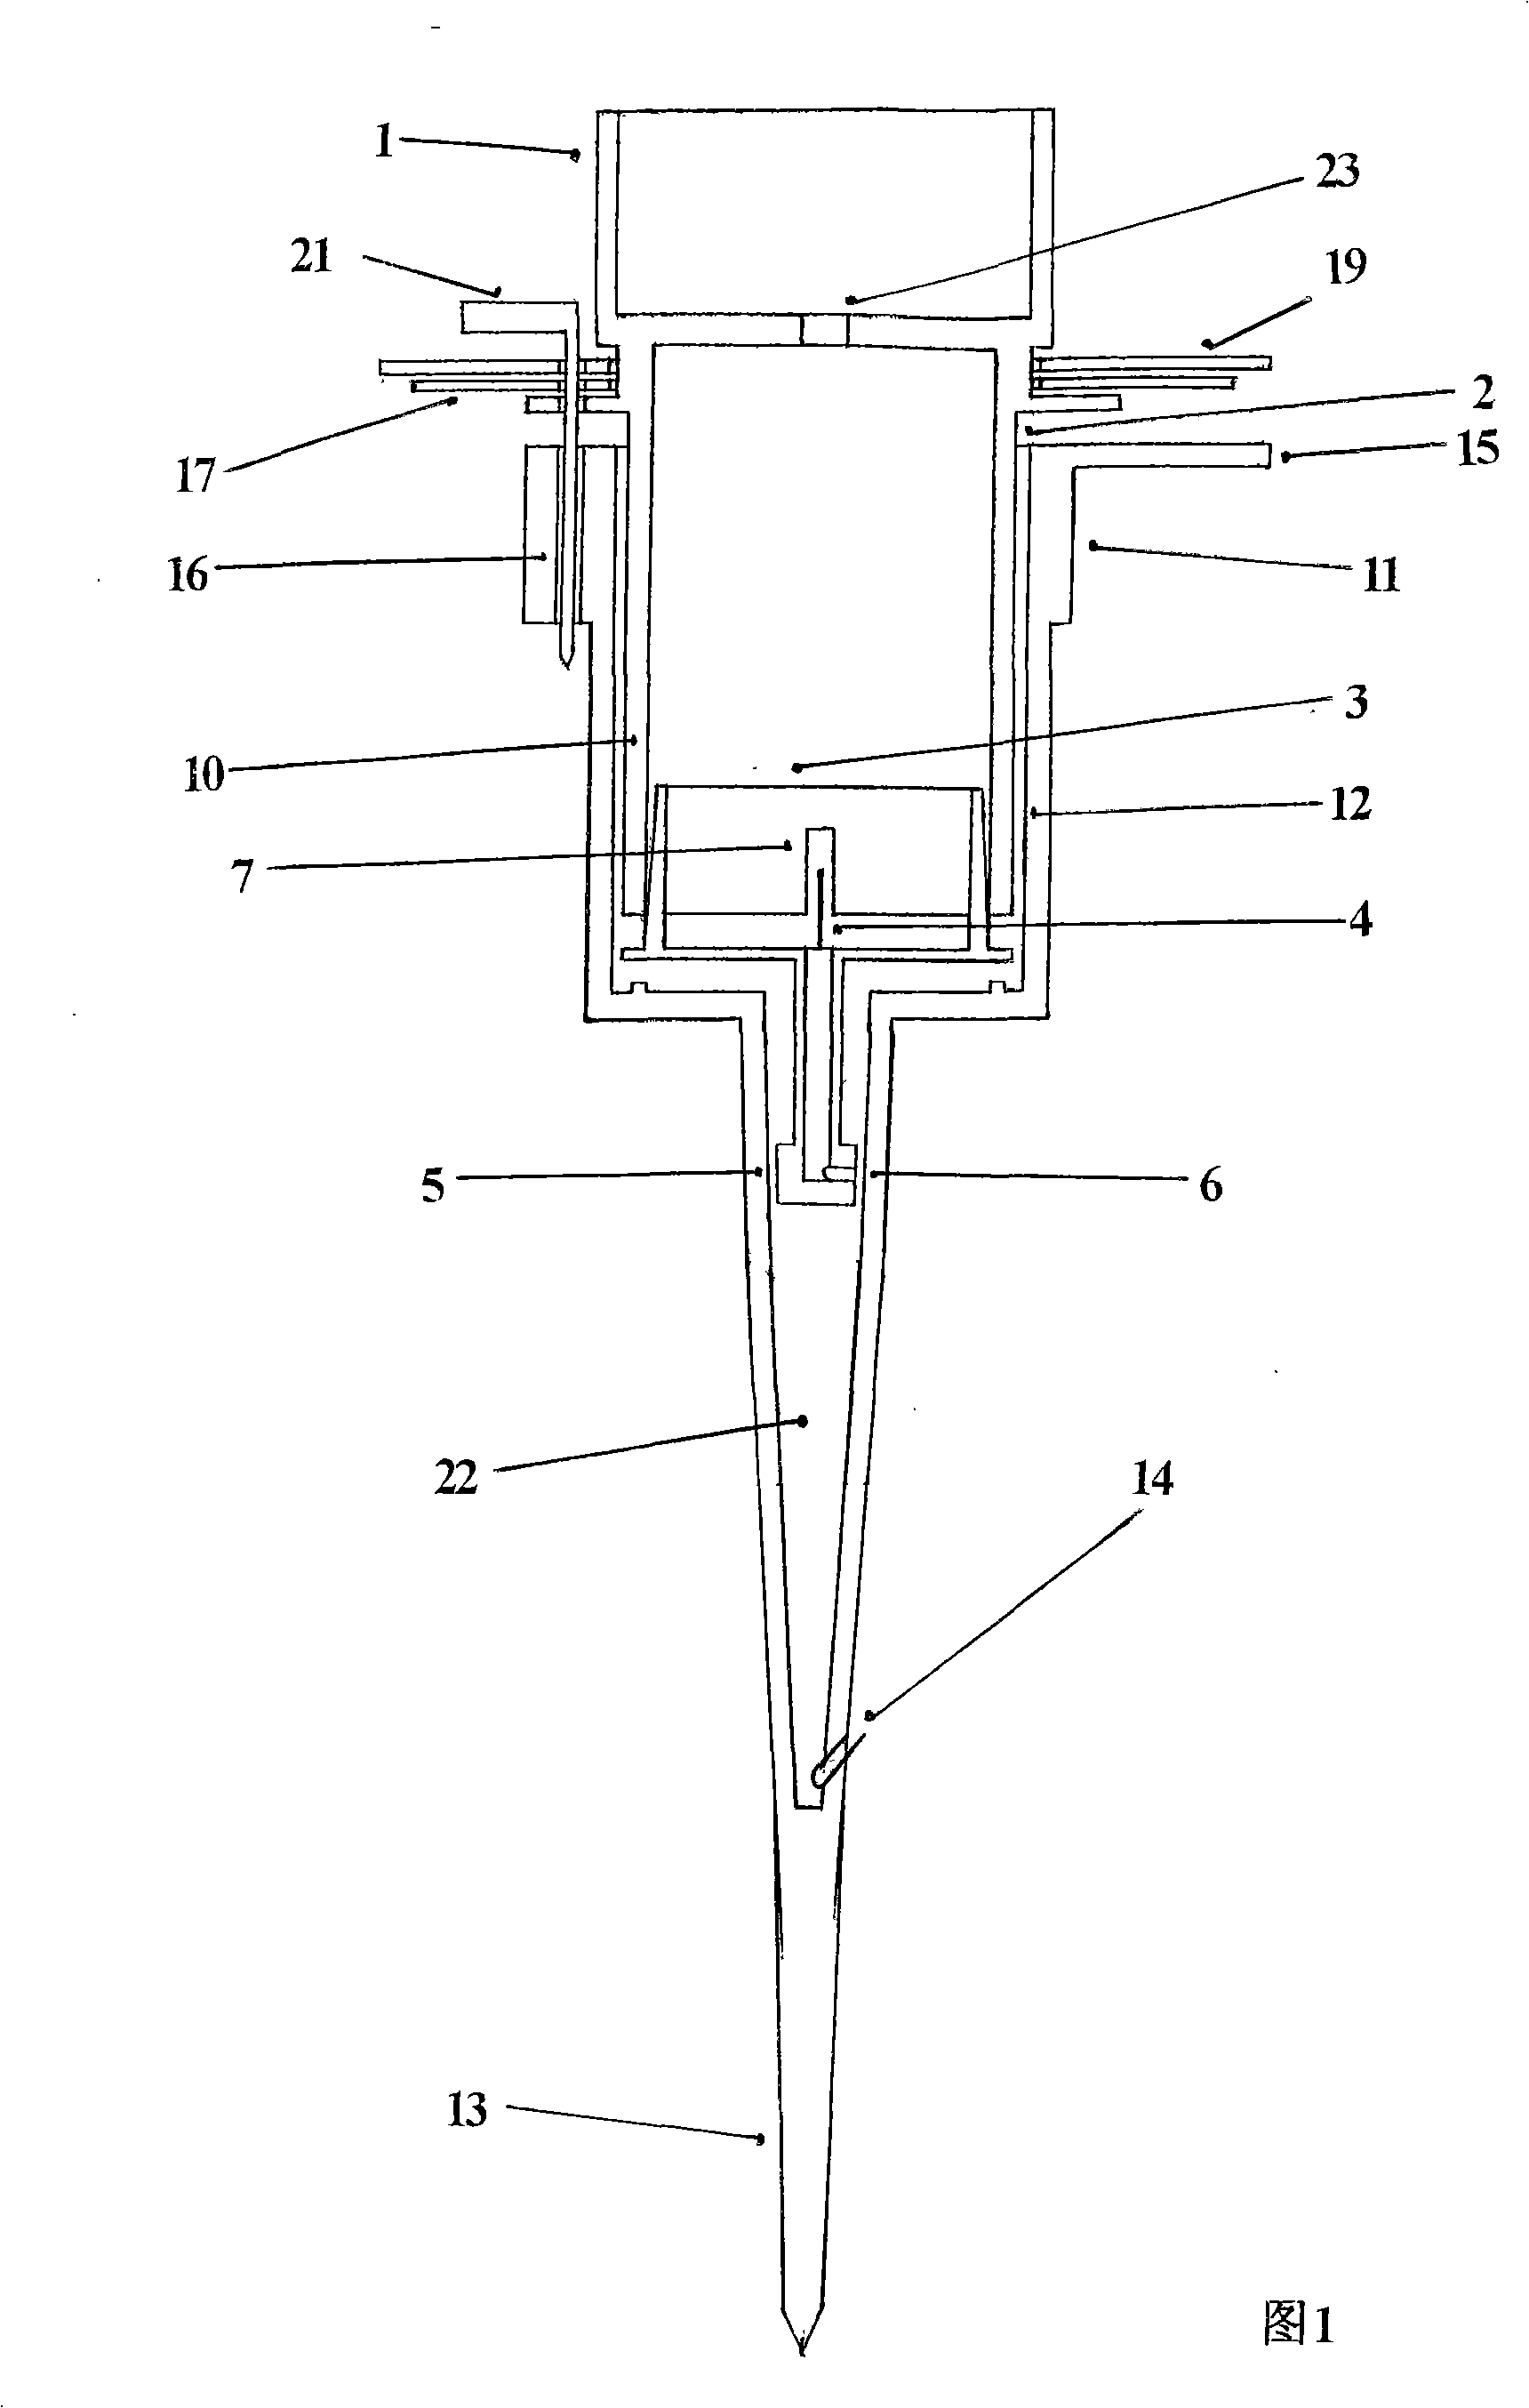 Accurate target date drip irrigation device connection cover main member apparatus with regulation calibration